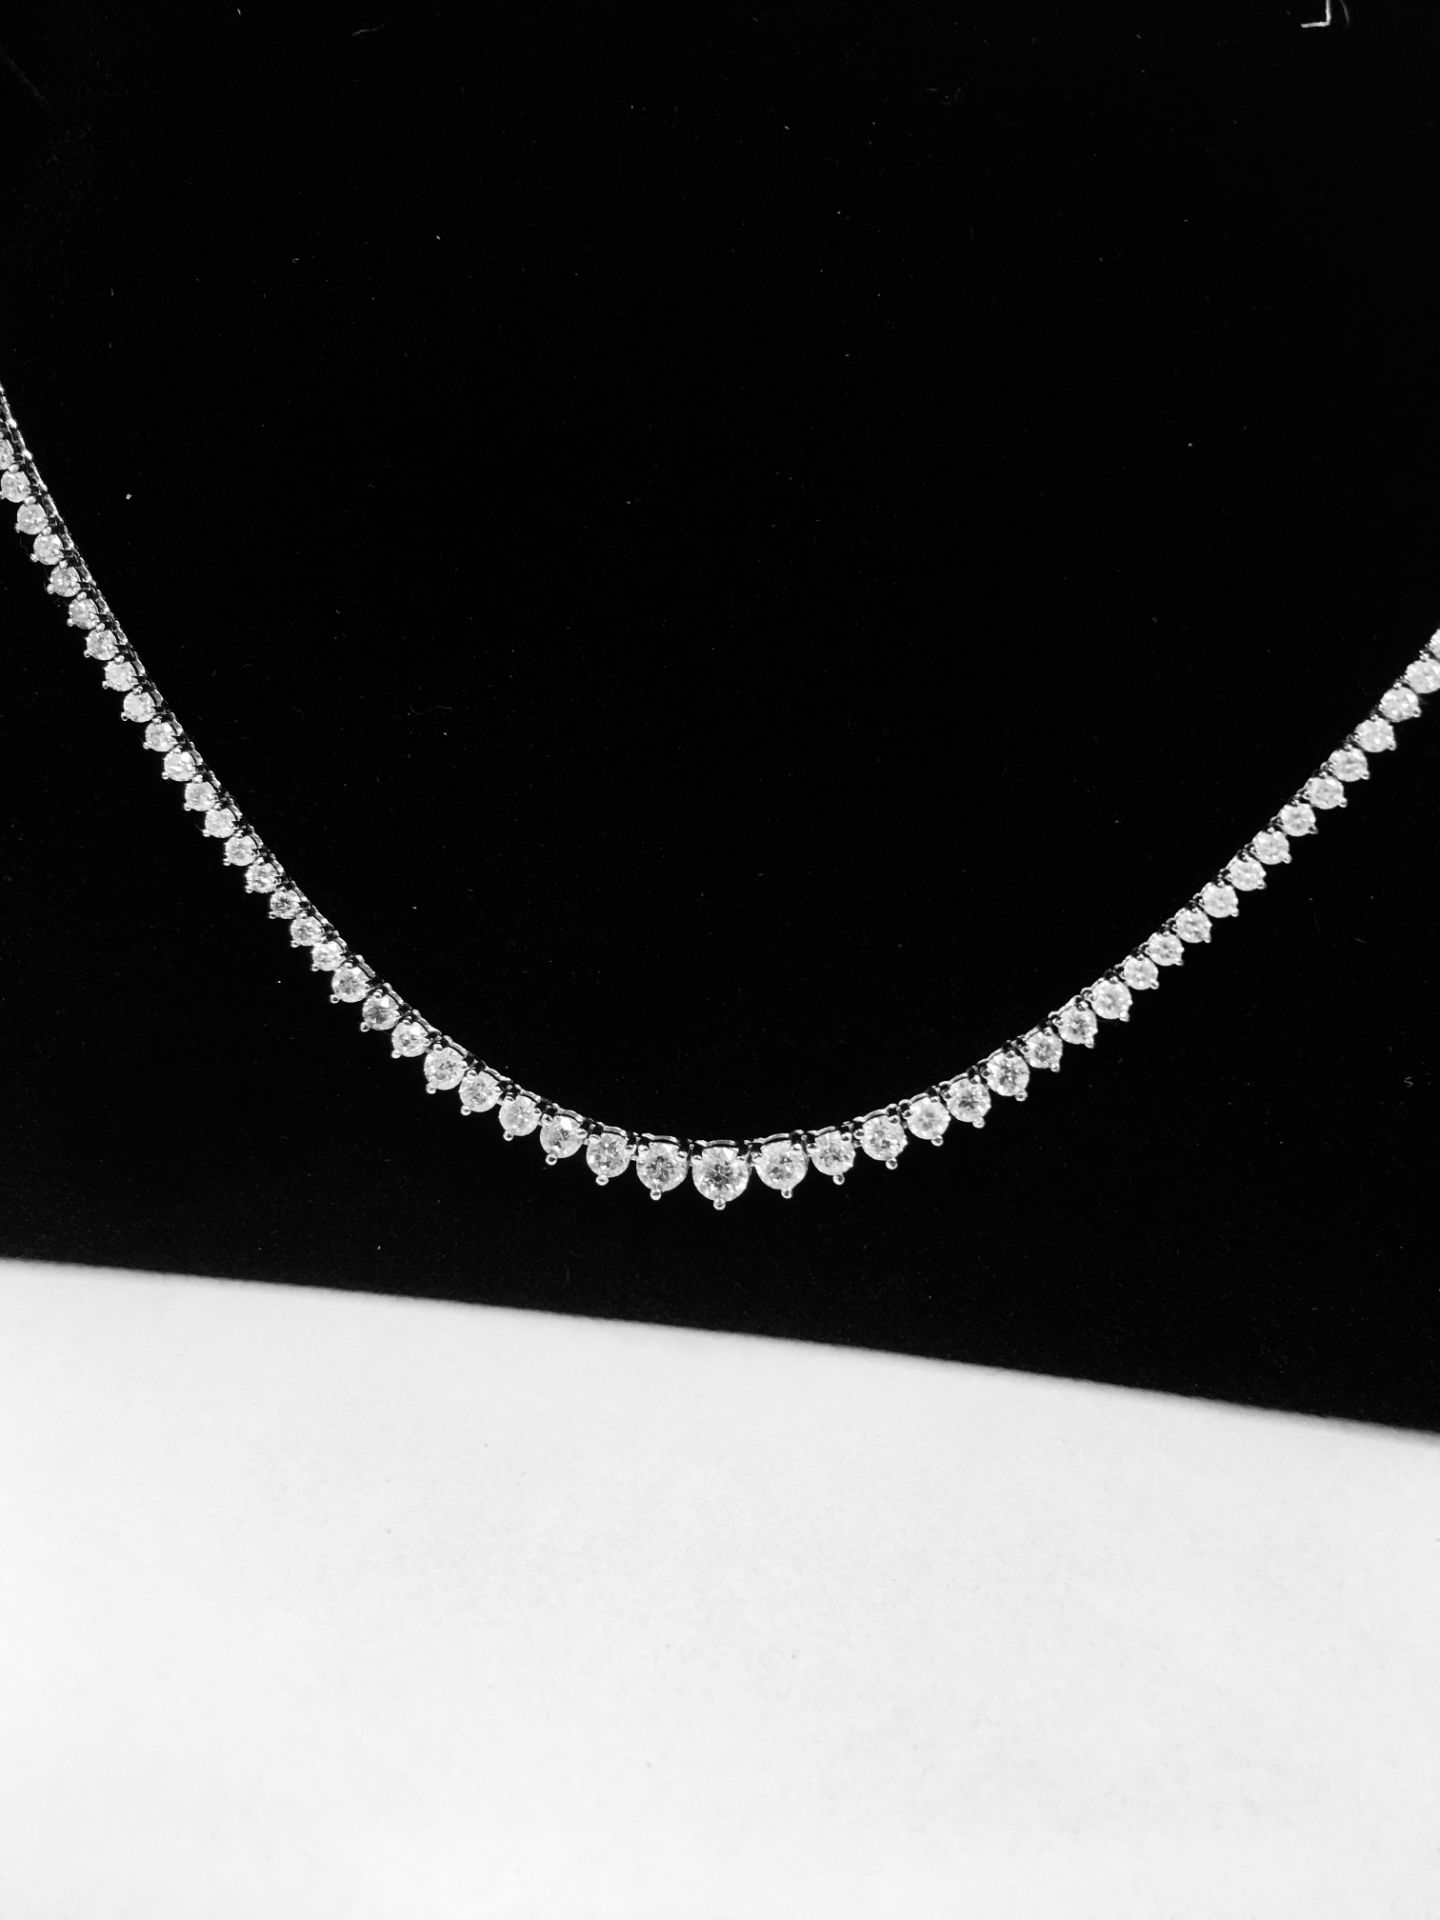 6.50ct Diamond tennis style necklace. 3 claw setting. Graduated diamonds, G colour, Si1 clarity - Image 4 of 6